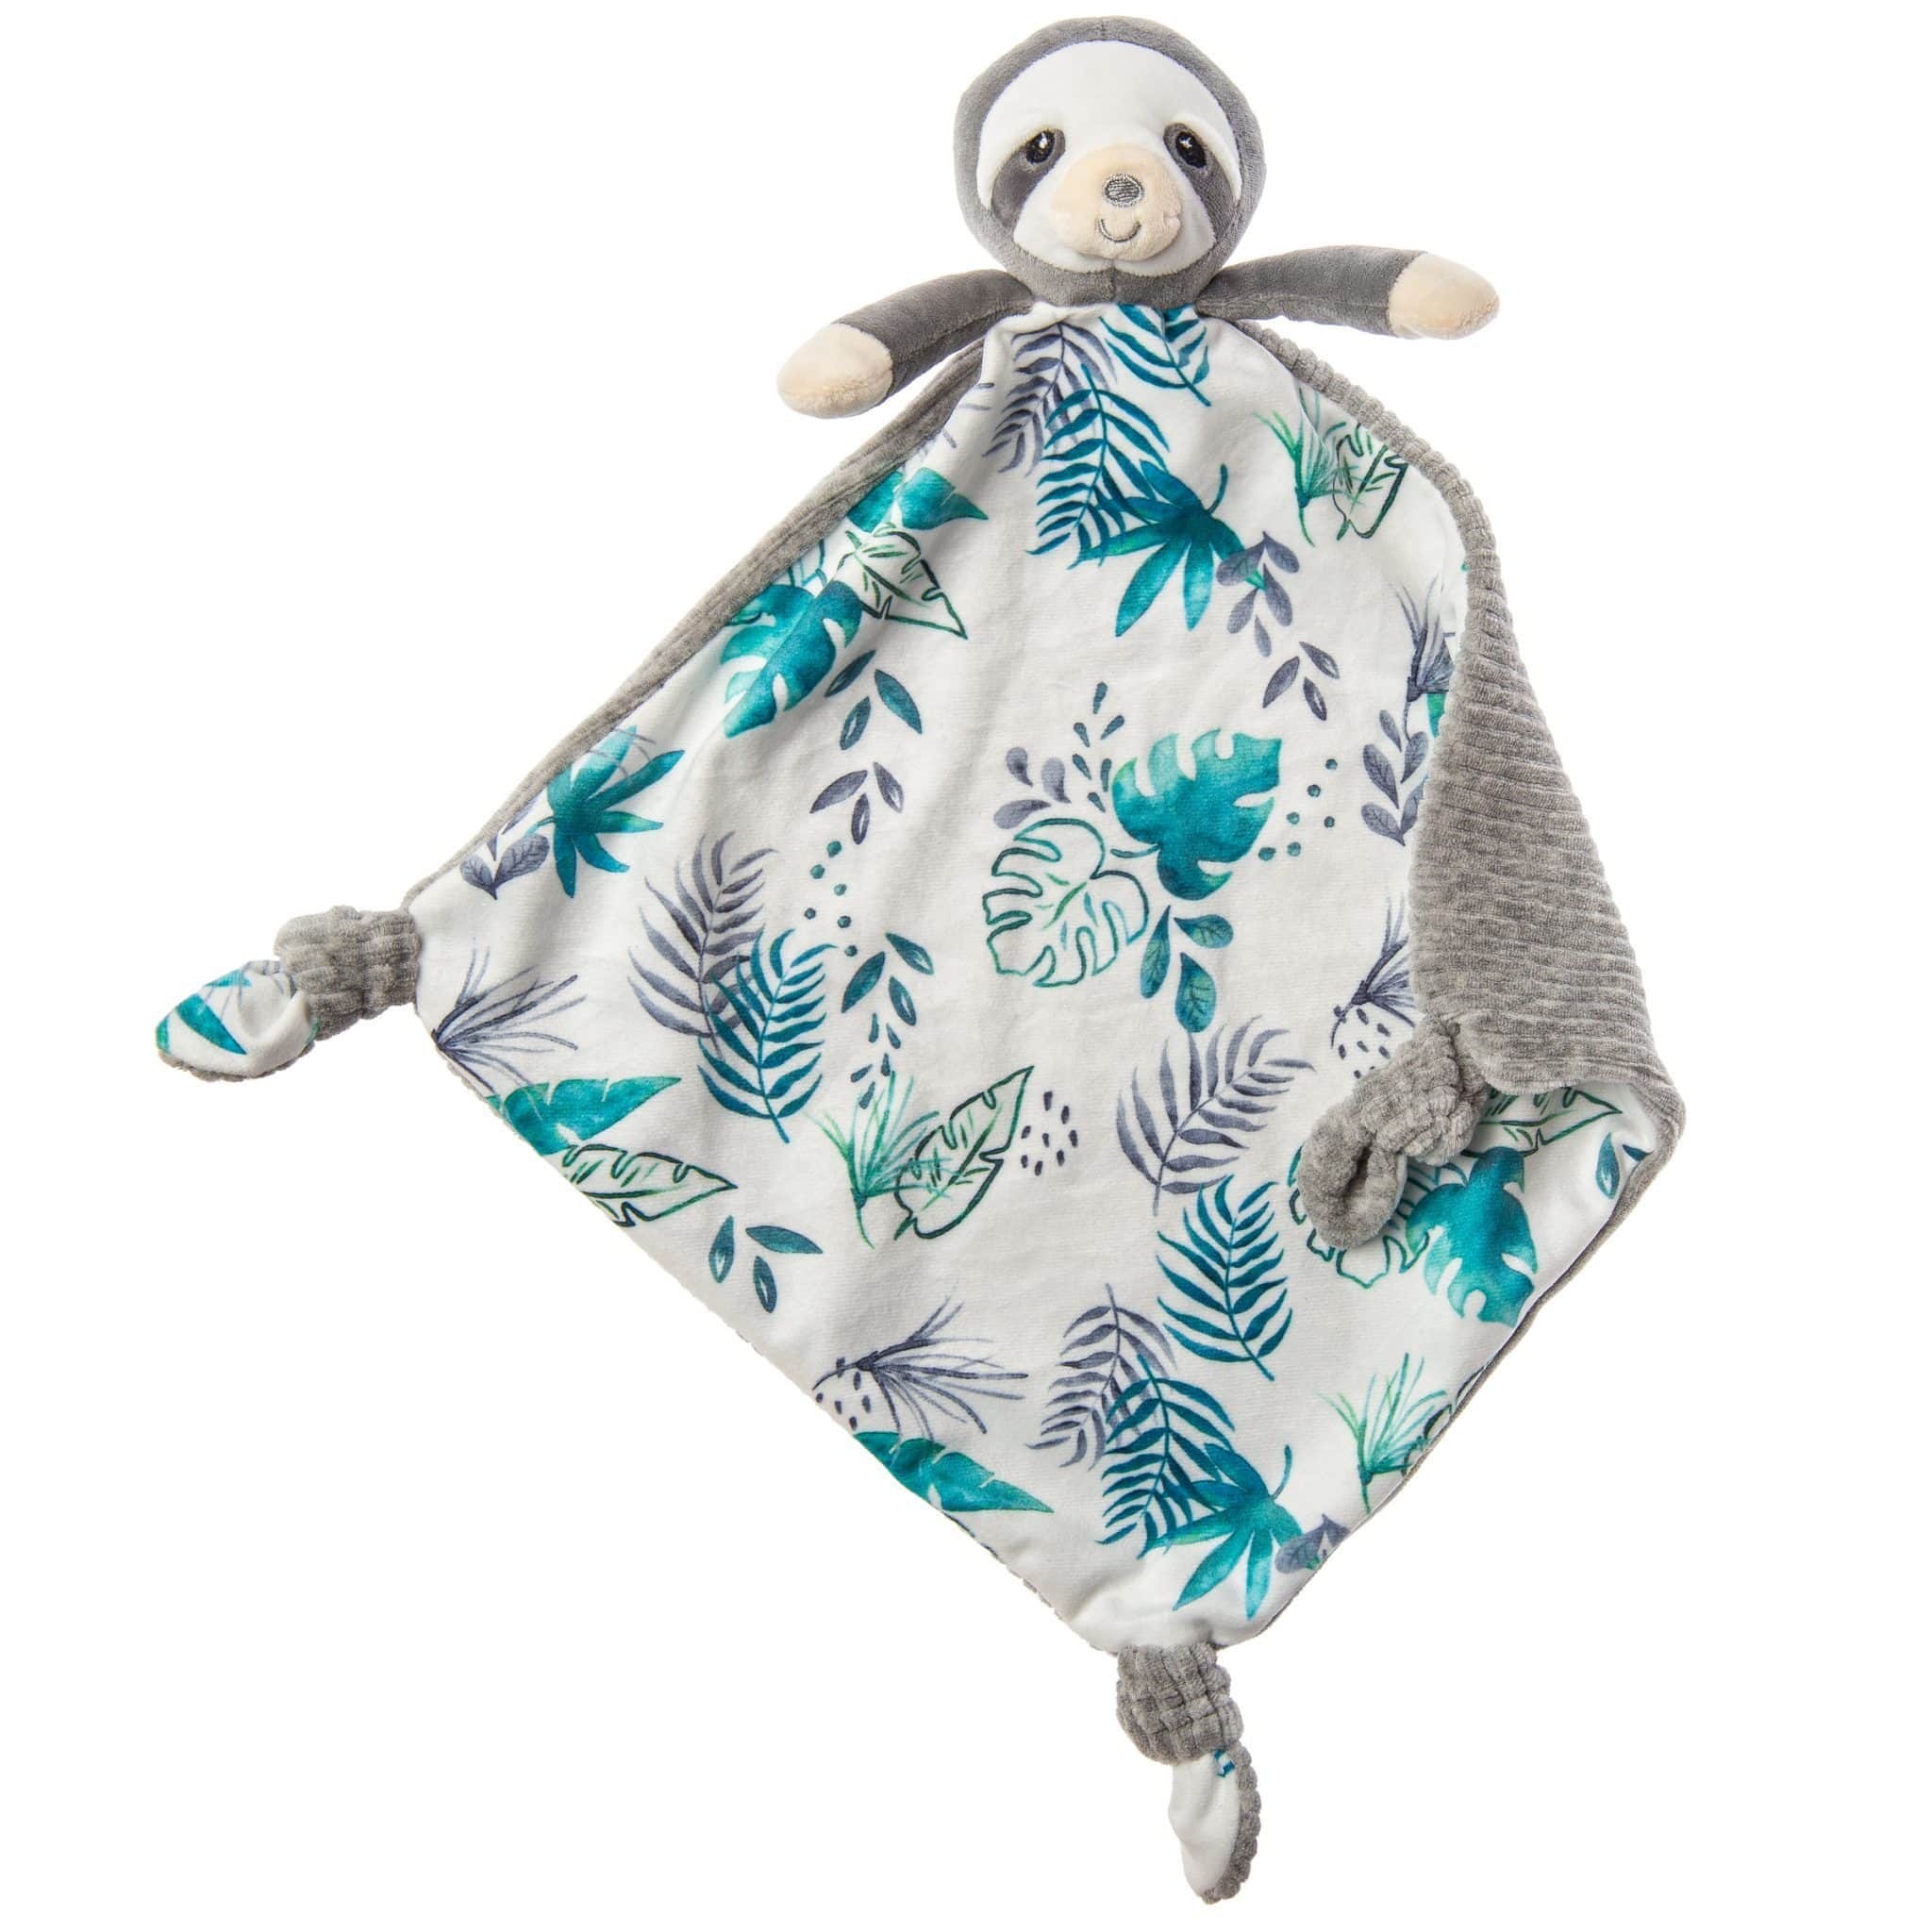 Little Knottie Sloth Comforter by Mary Meyer - Bumbles & Boo